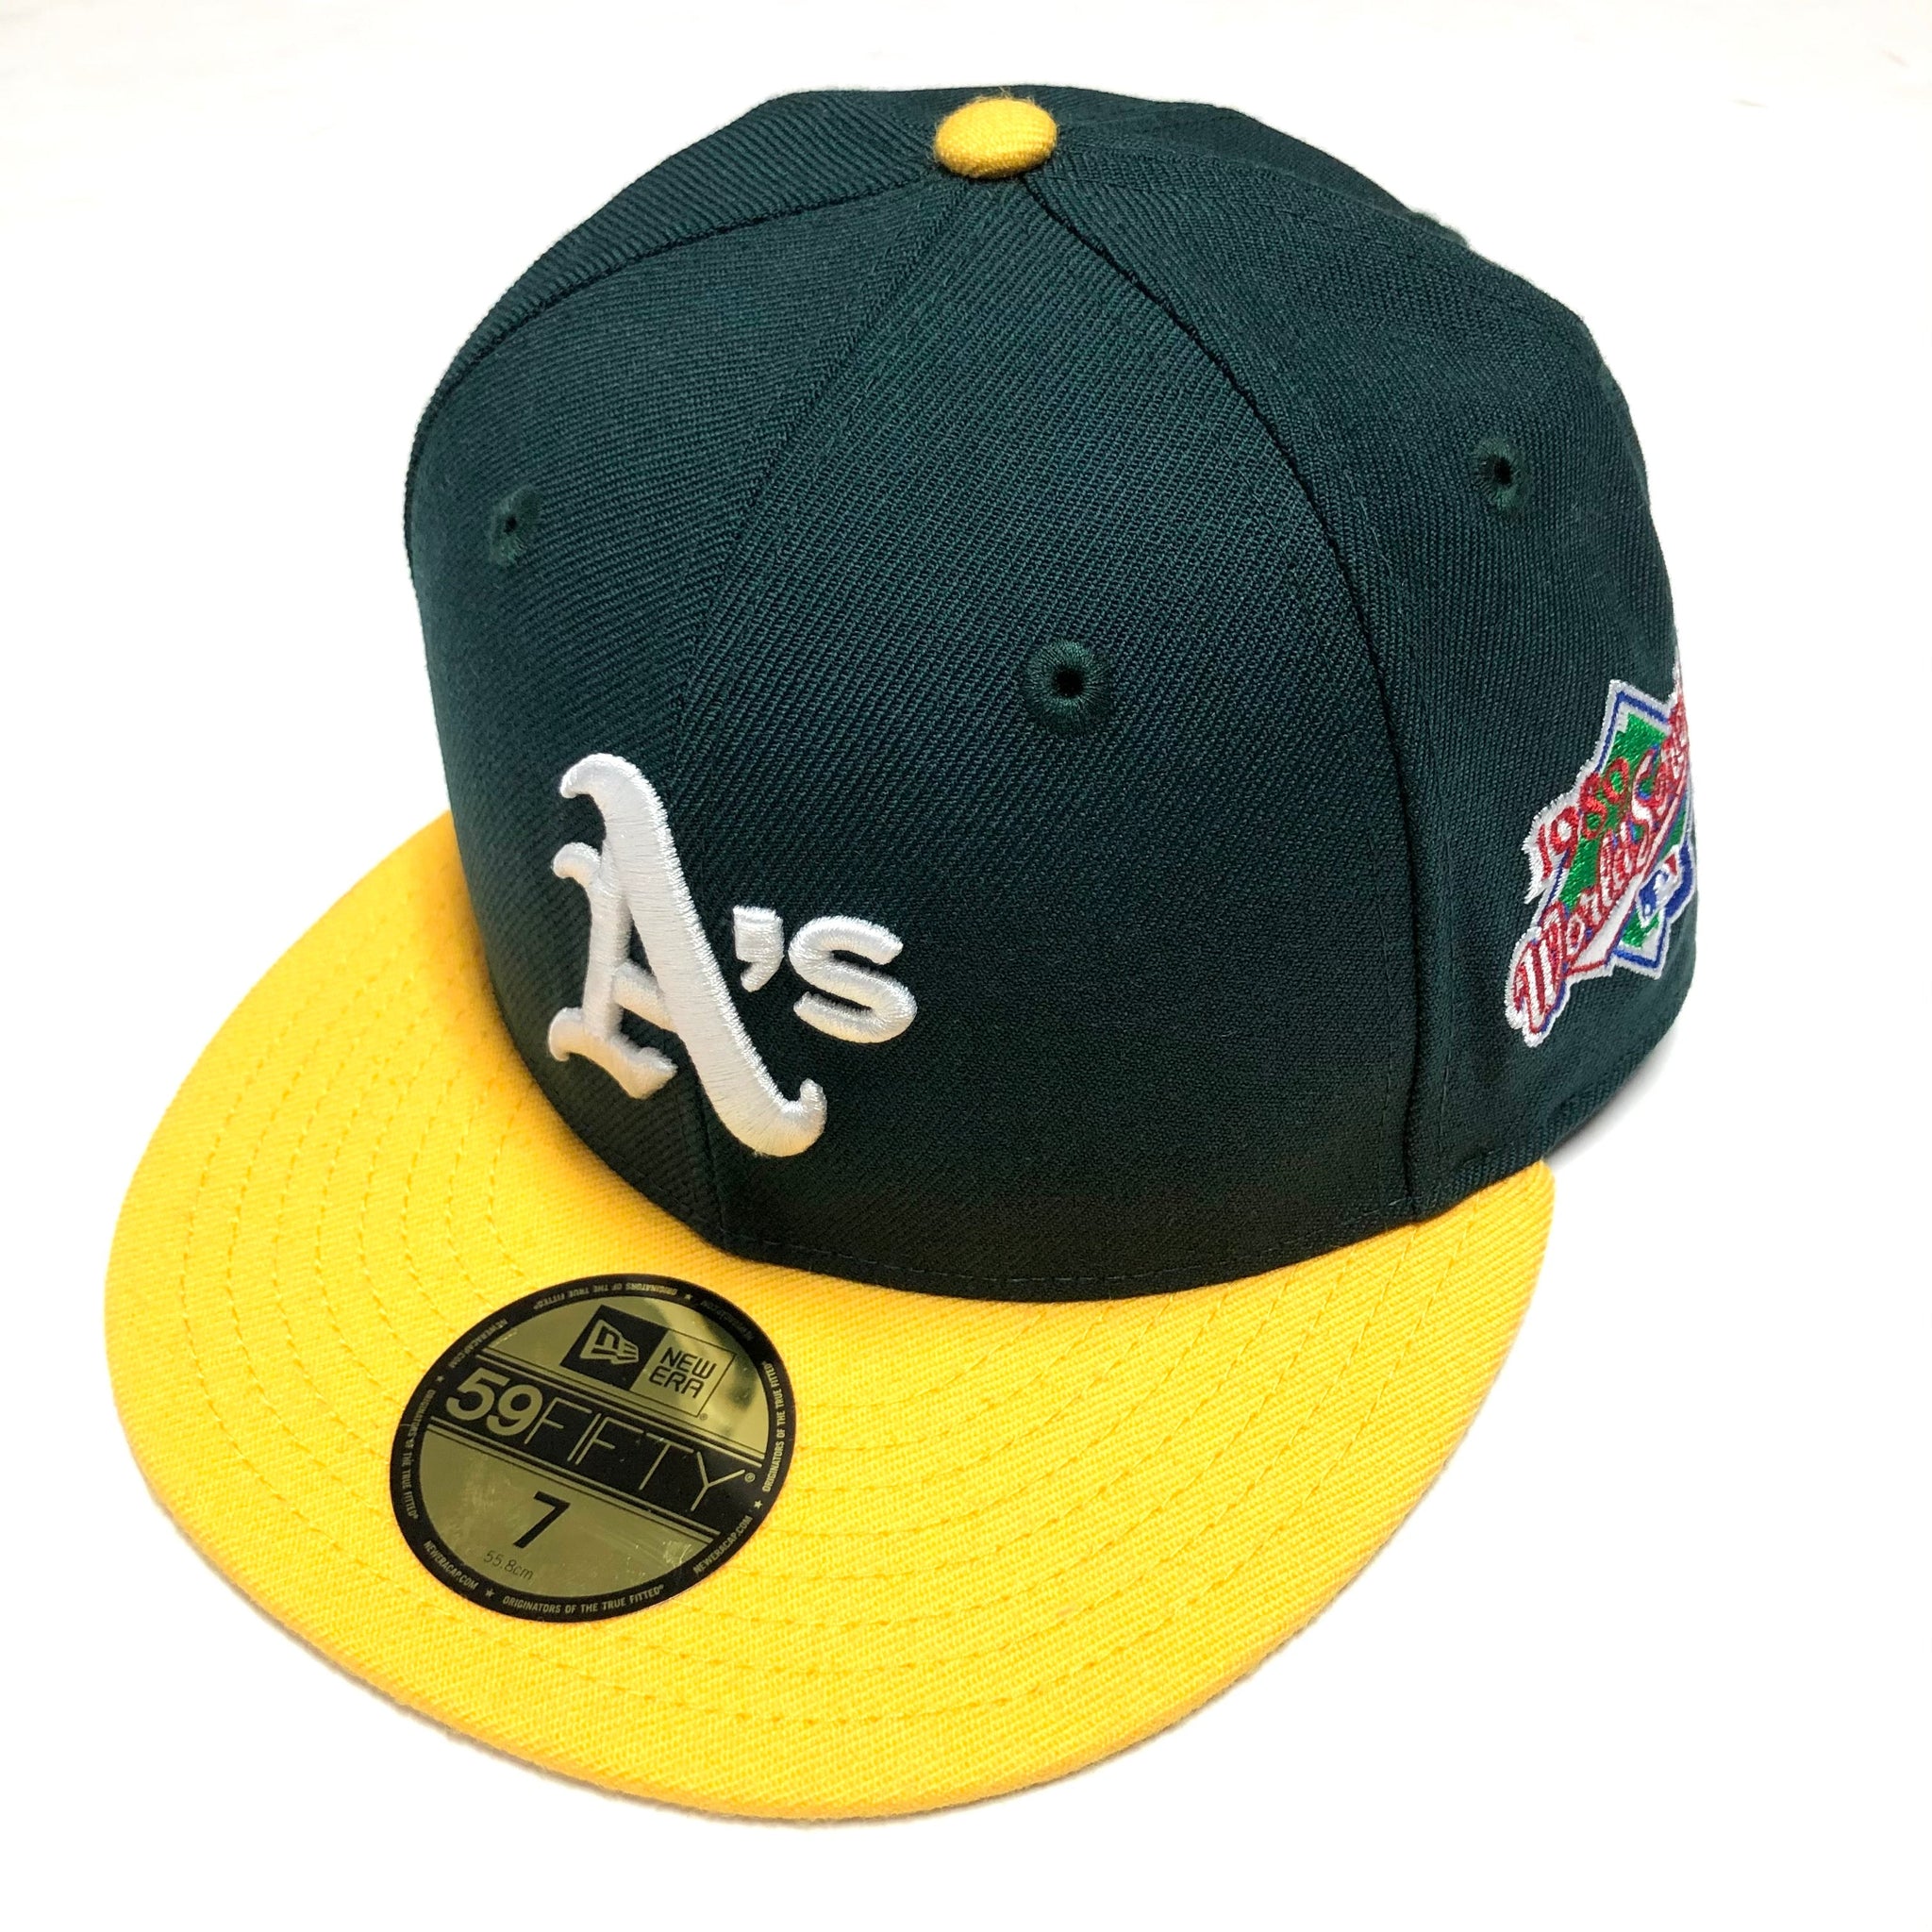 NEW ERA “1989 WS SIDE PATCH” OAKLAND A'S FITTED HAT – So Fresh ...